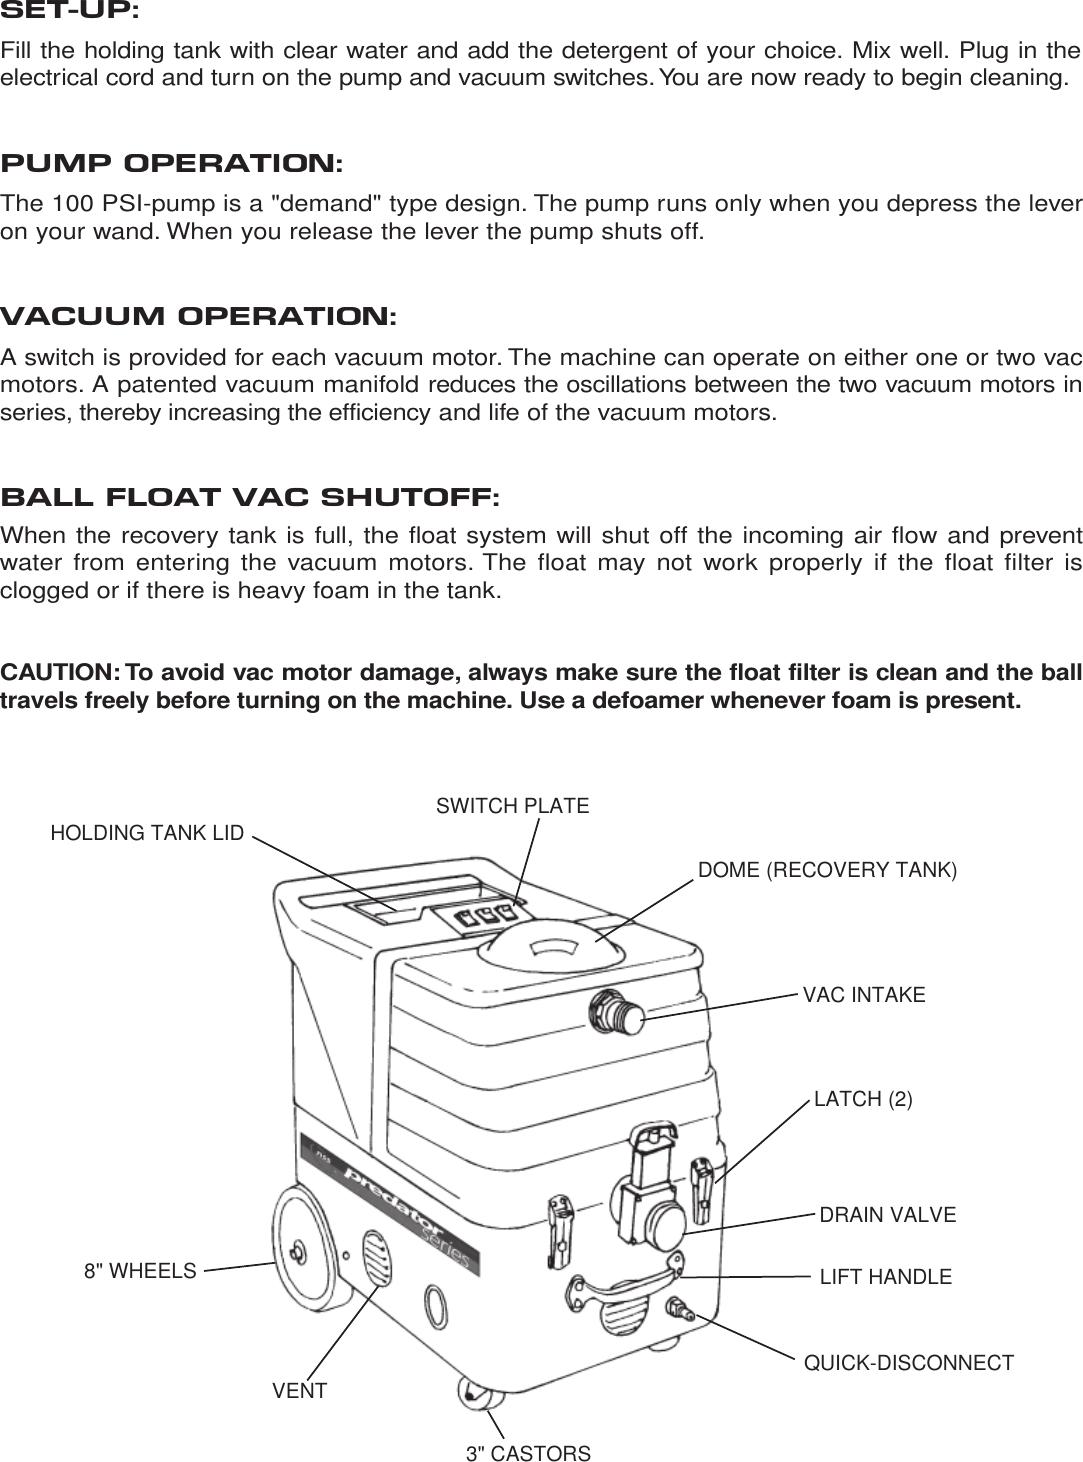 Page 3 of 8 - Nss-predator-cxc100-carpet-extractor-parts-and-operator-manual